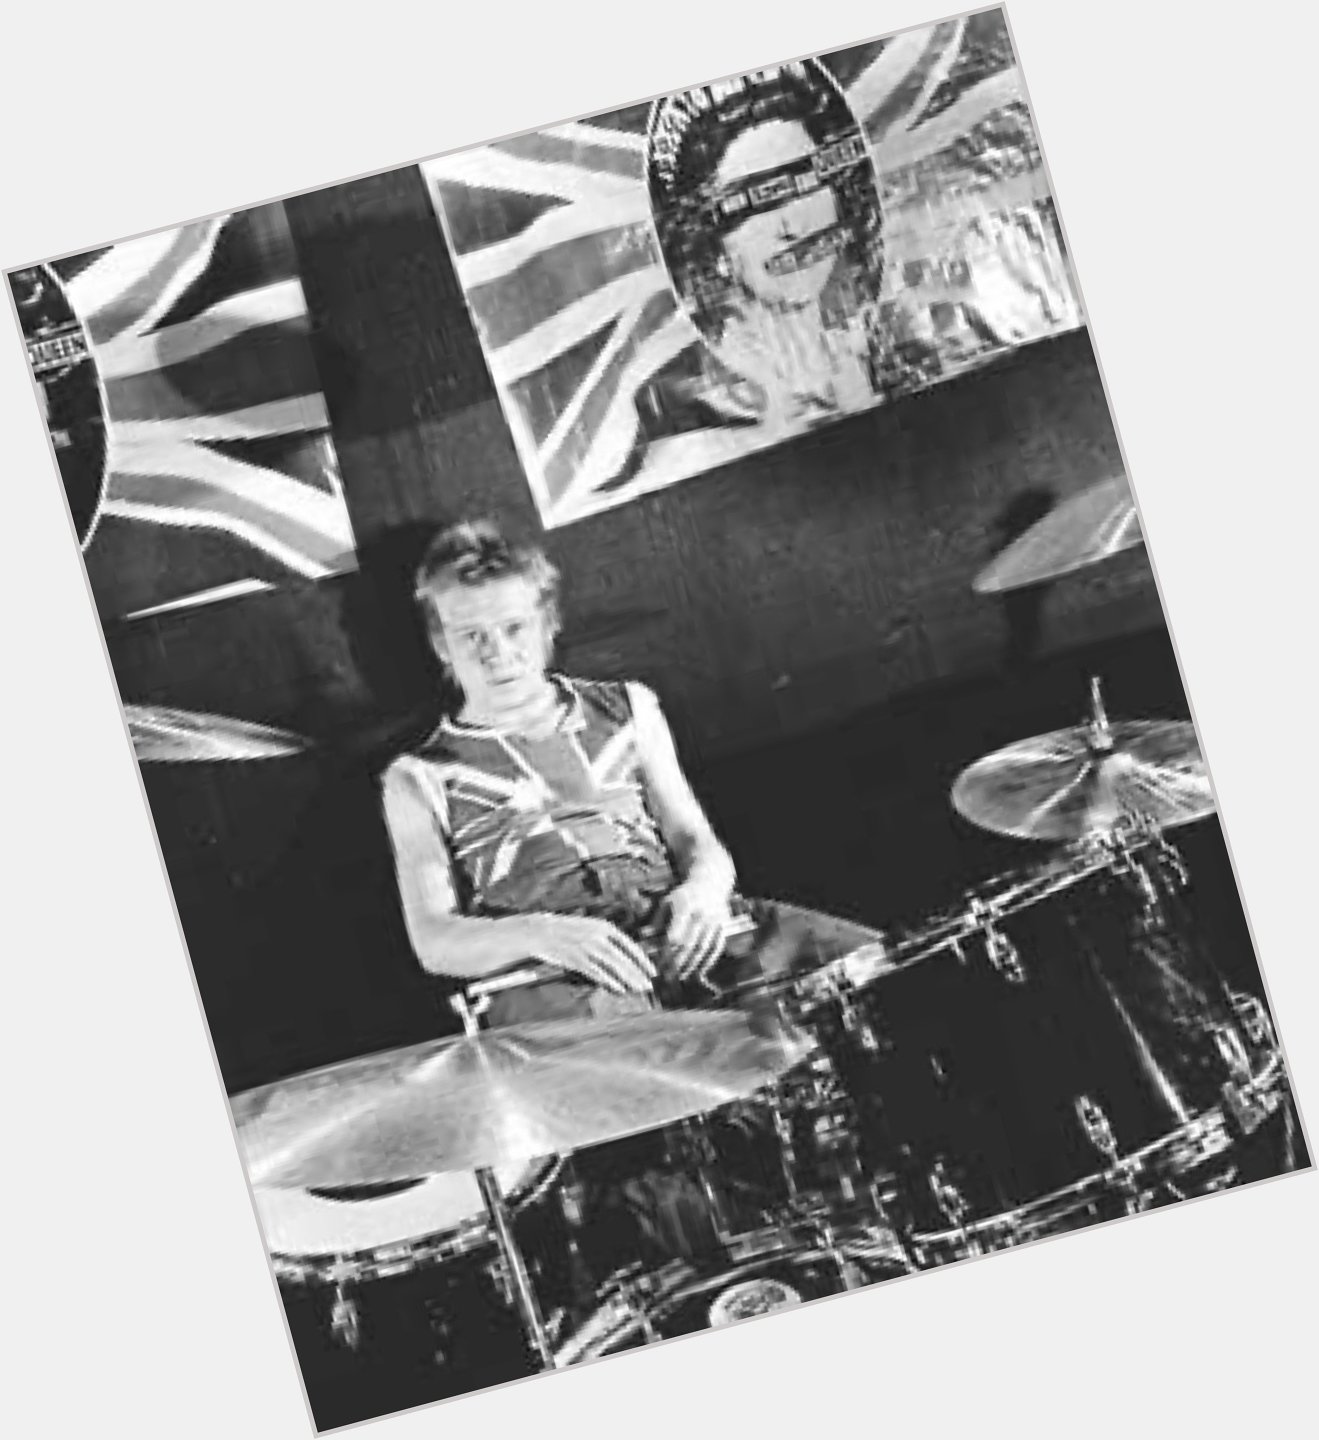 Happy 66th birthday to Sex Pistols drummer Paul Cook, who was born on this day in 1956. 